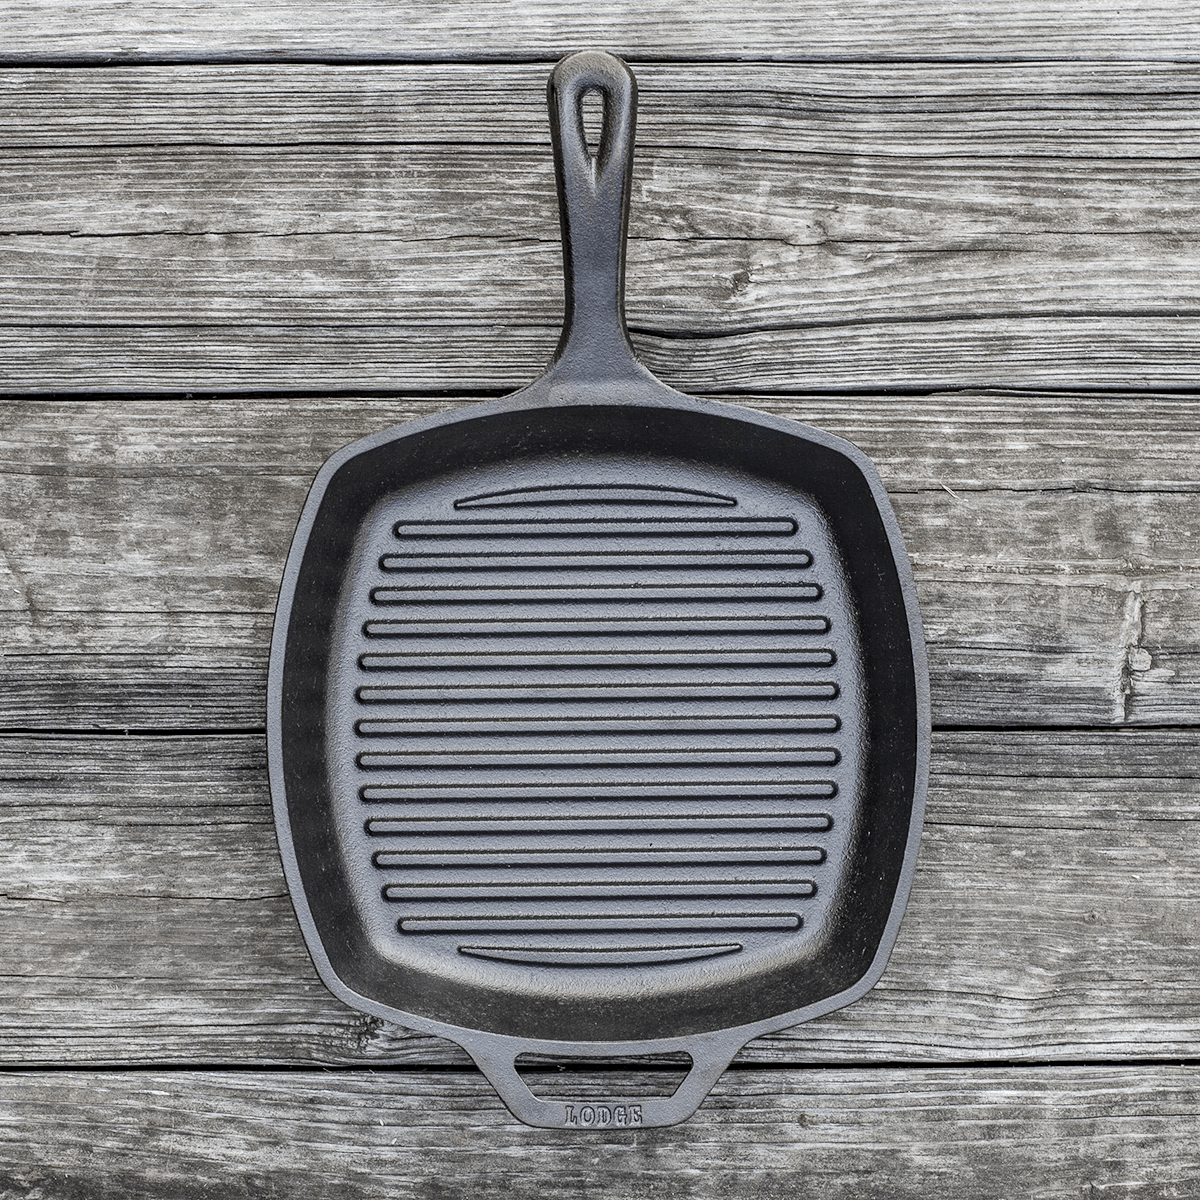 MICHELANGELO Cast Iron Skillet, 10 Inch Cast Iron Skillet With Lid,  Preseasoned Oven Safe Skillet, Iron Skillets for Cooking with Silicone  Handle 